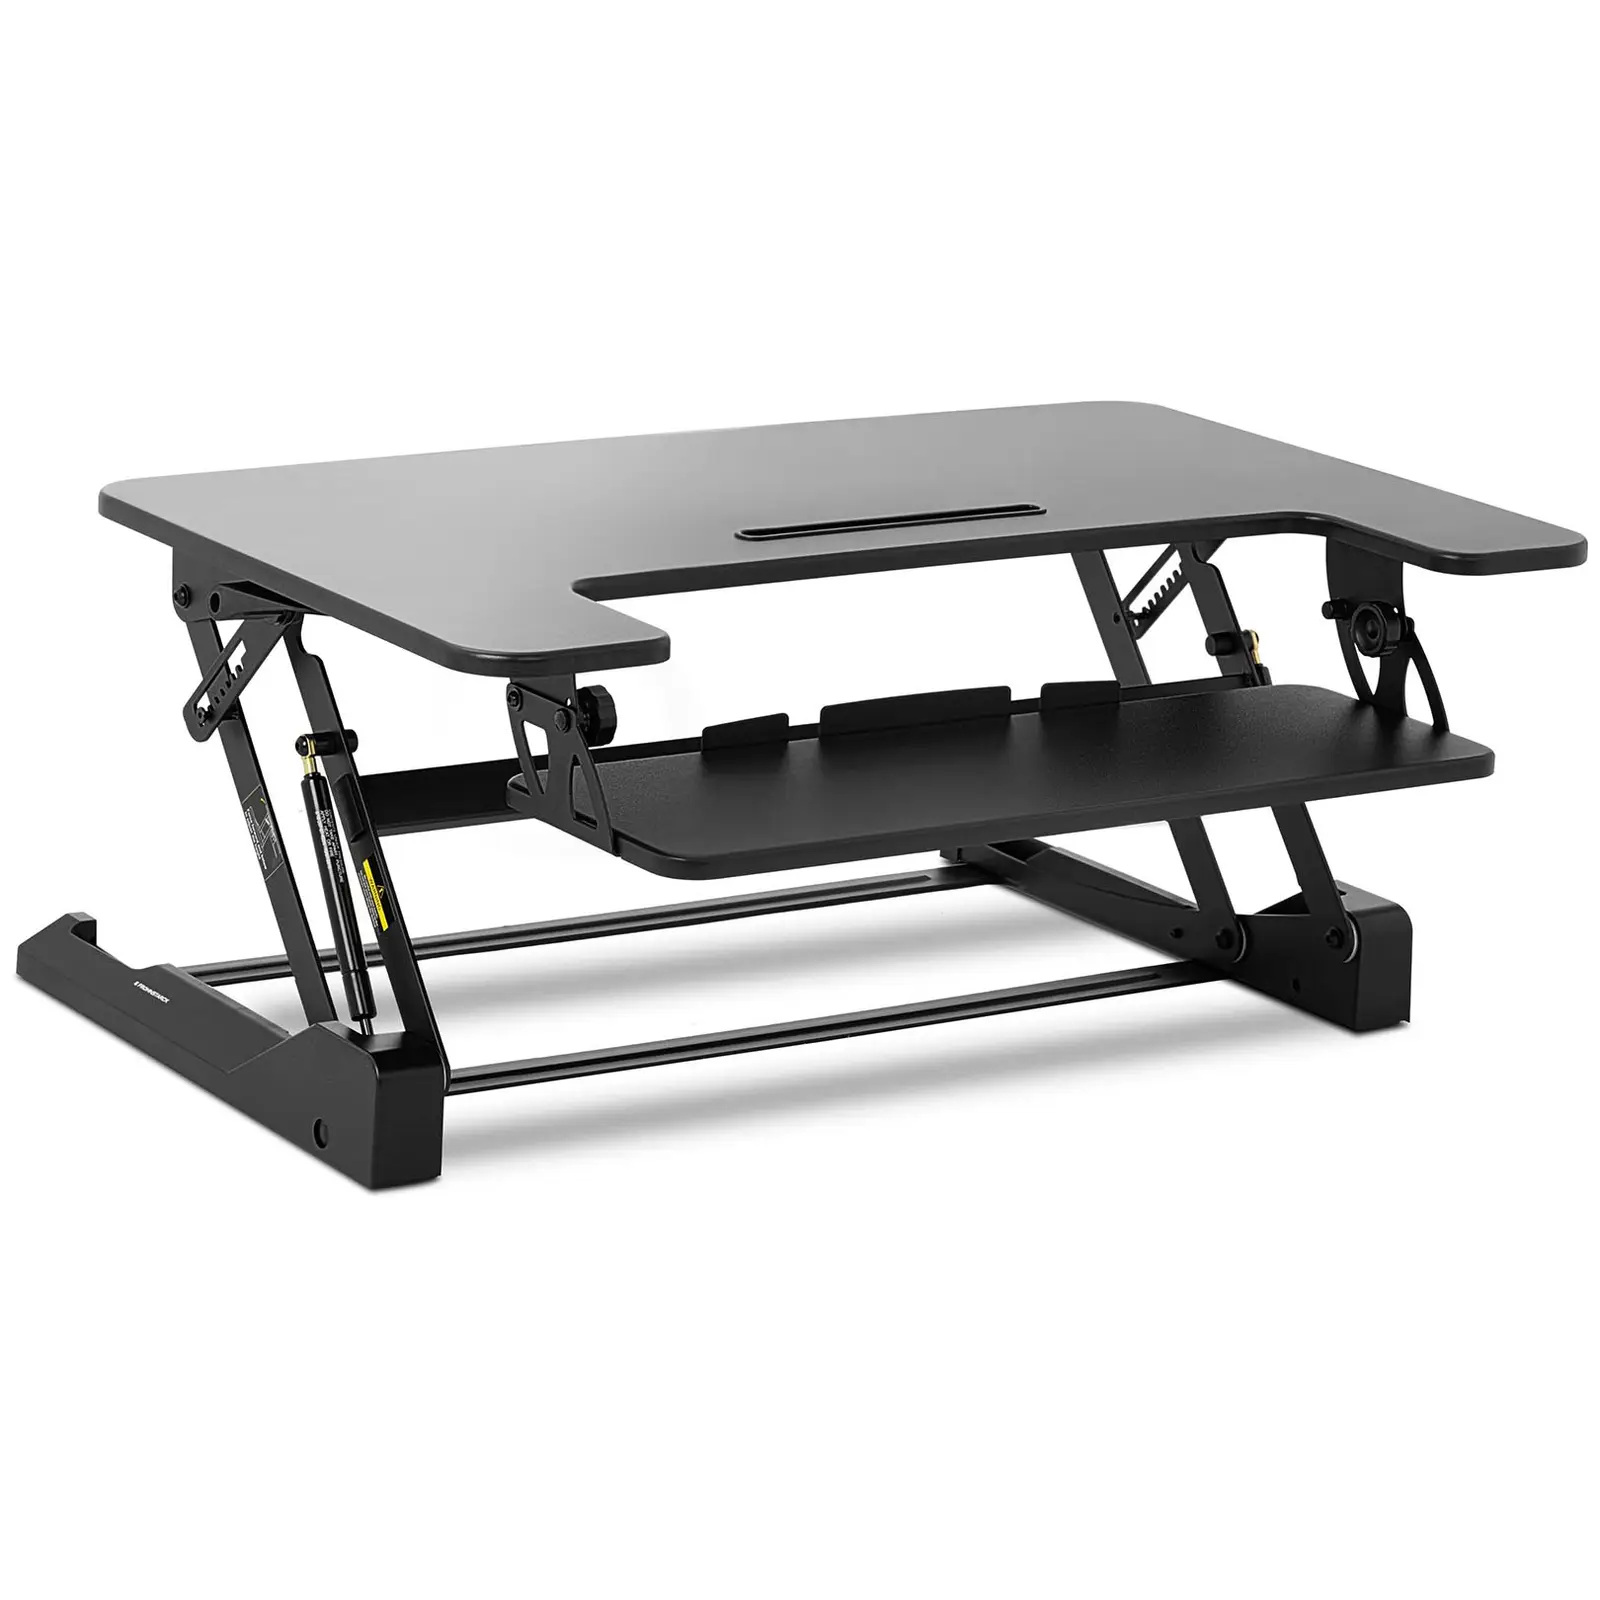 Sit-Stand Desk - height-adjustable, 8 steps - 16.5 to 41.5 cm